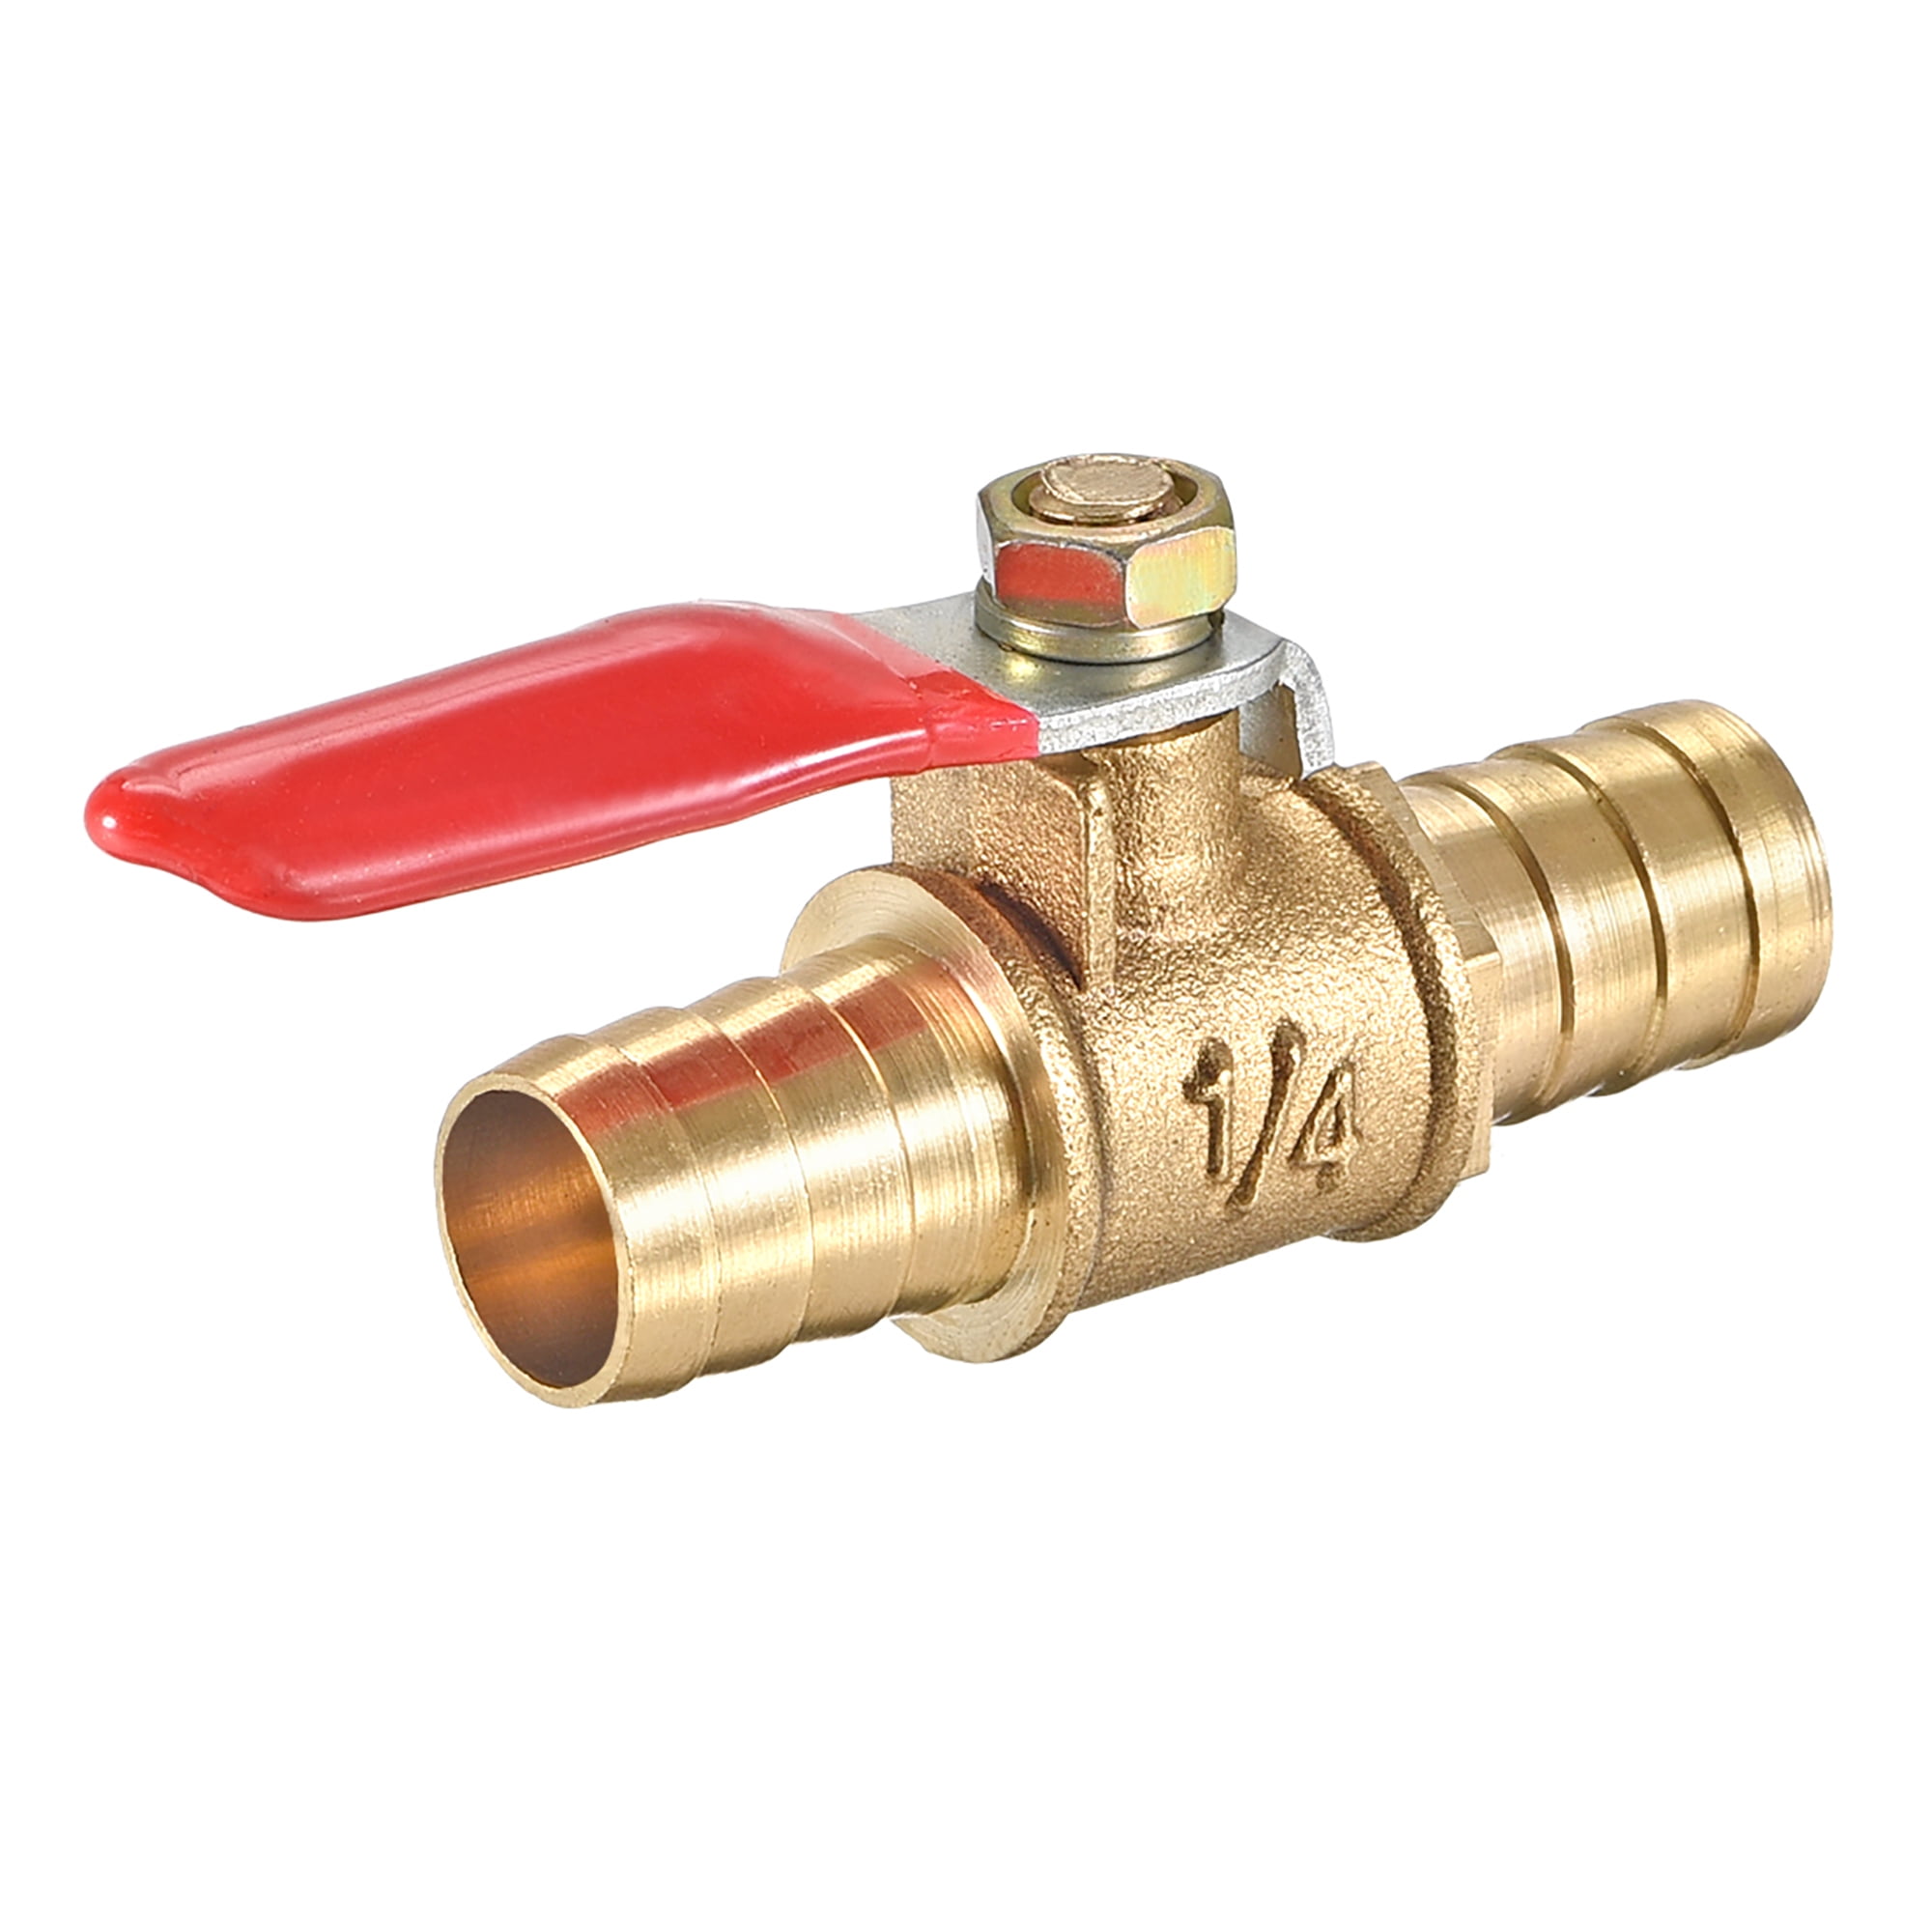 3/8" BSP Male to 10mm Hose Barb Brass Ball Valve Pipe Fitting Red Lever Handle 